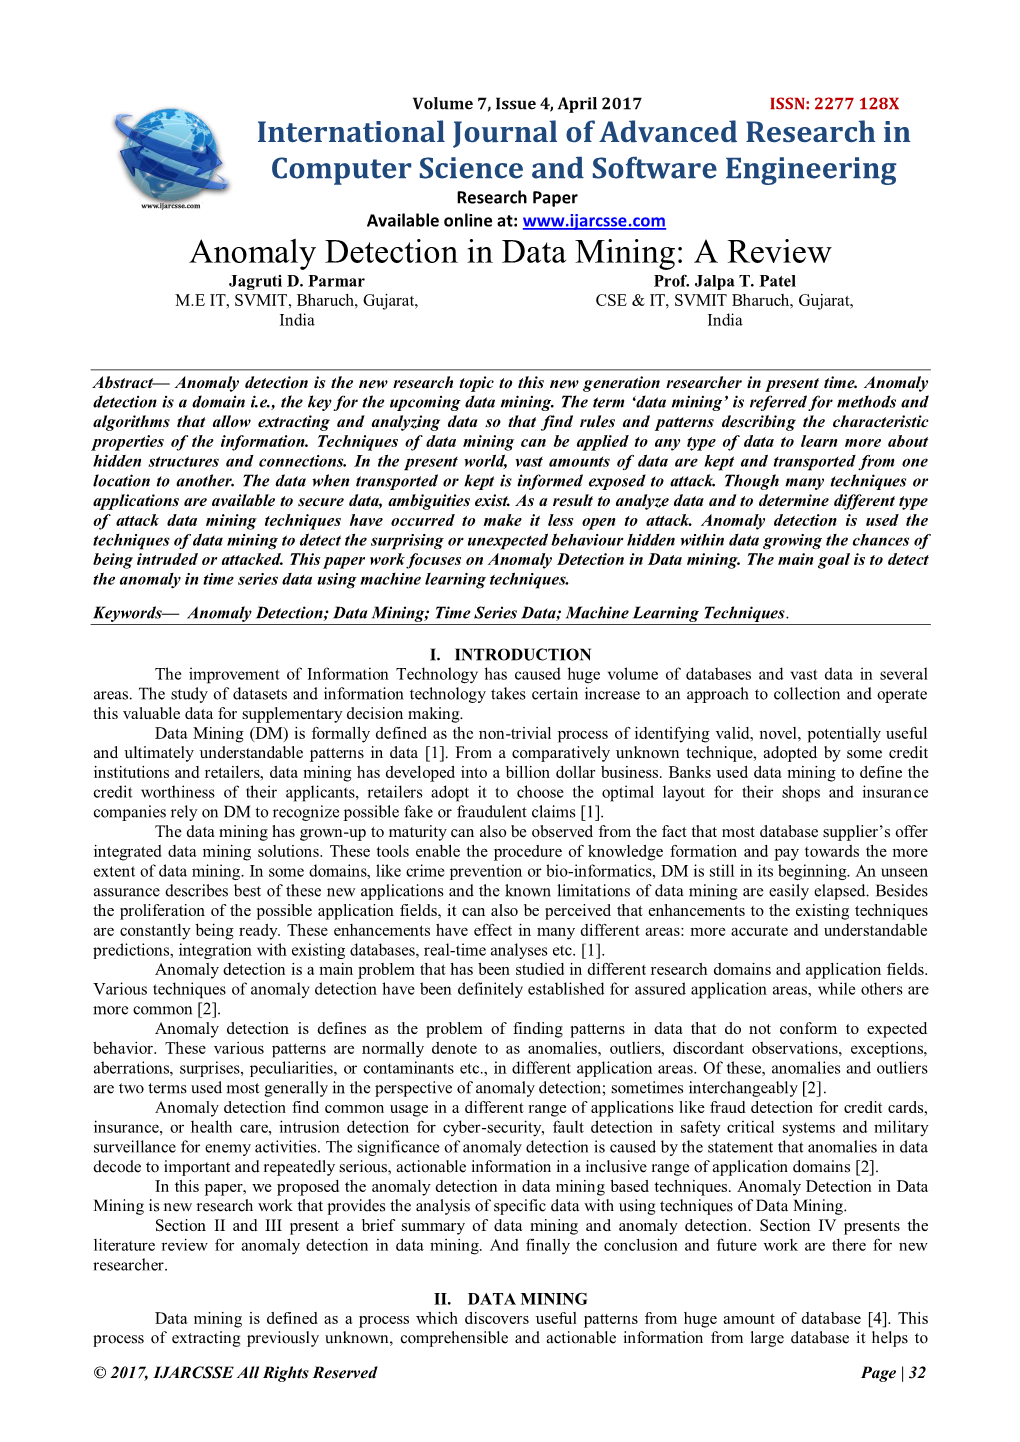 Anomaly Detection in Data Mining: a Review Jagruti D